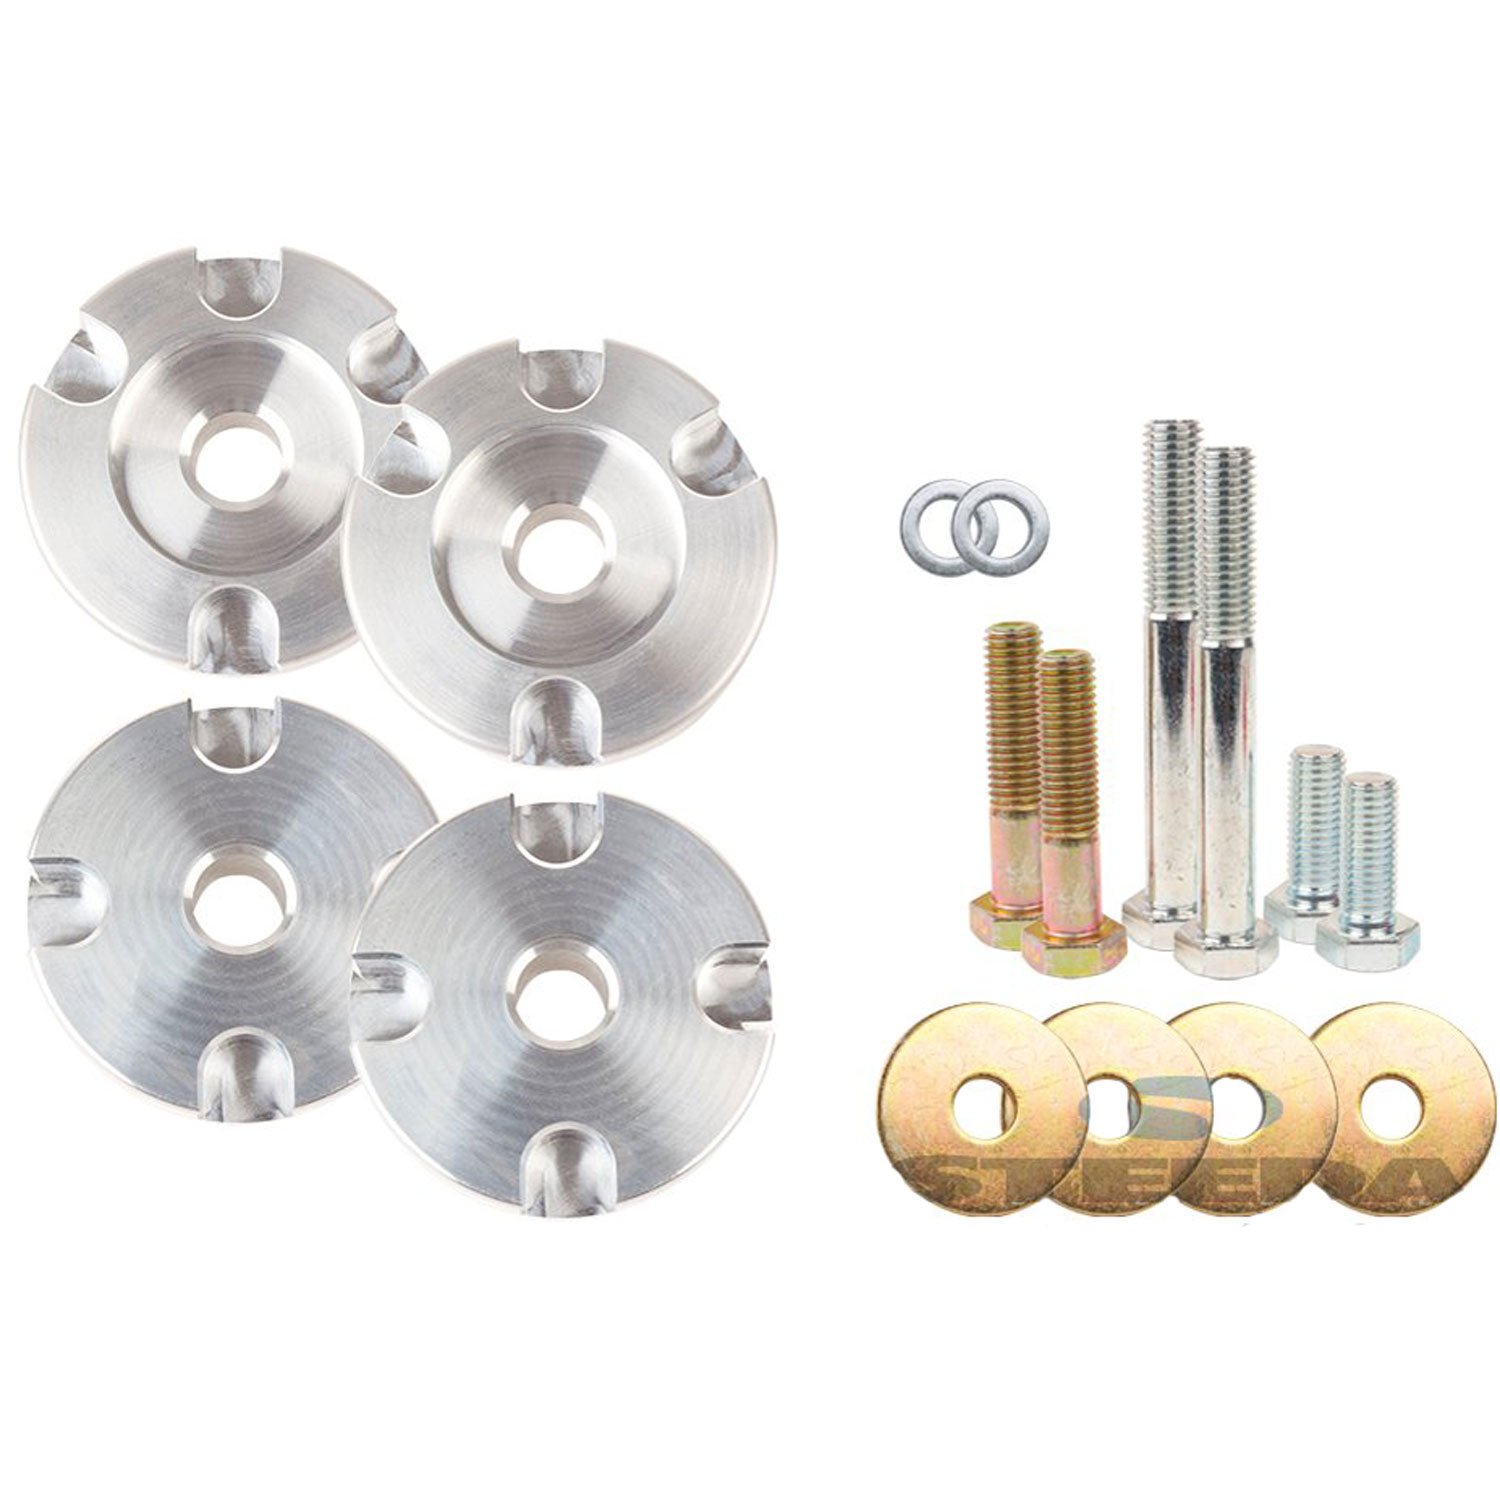 Solid Aluminum Diff Mount Bushing System